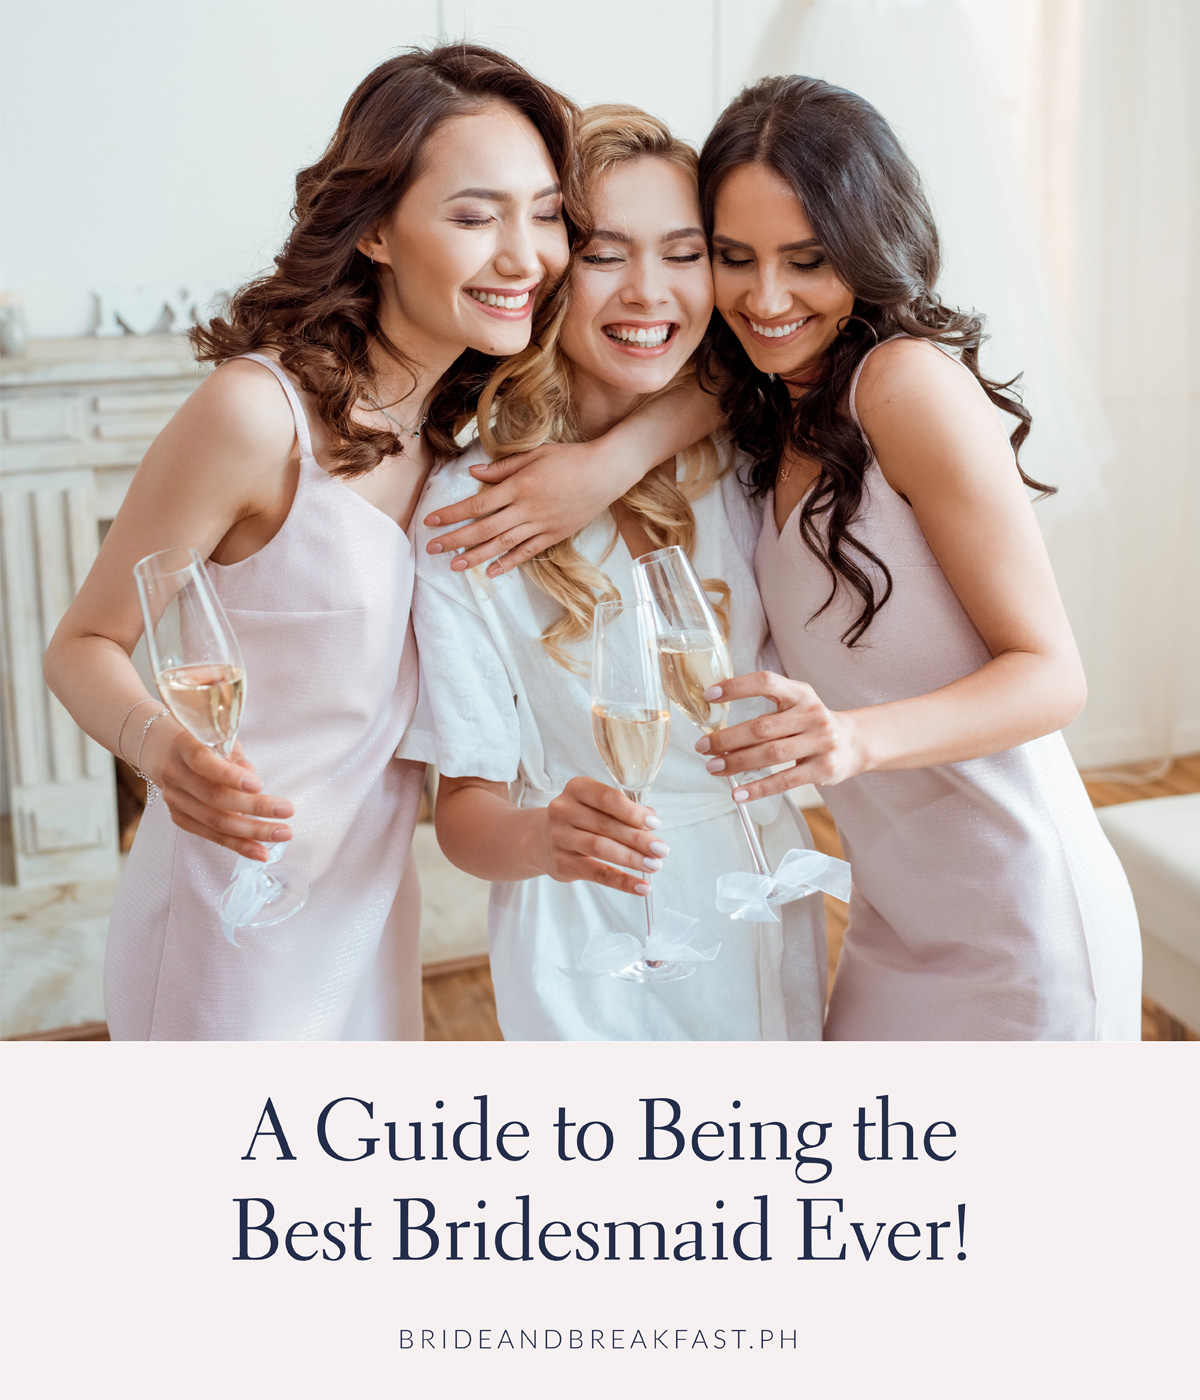 A Guide to Being the Best Bridesmaid Ever!